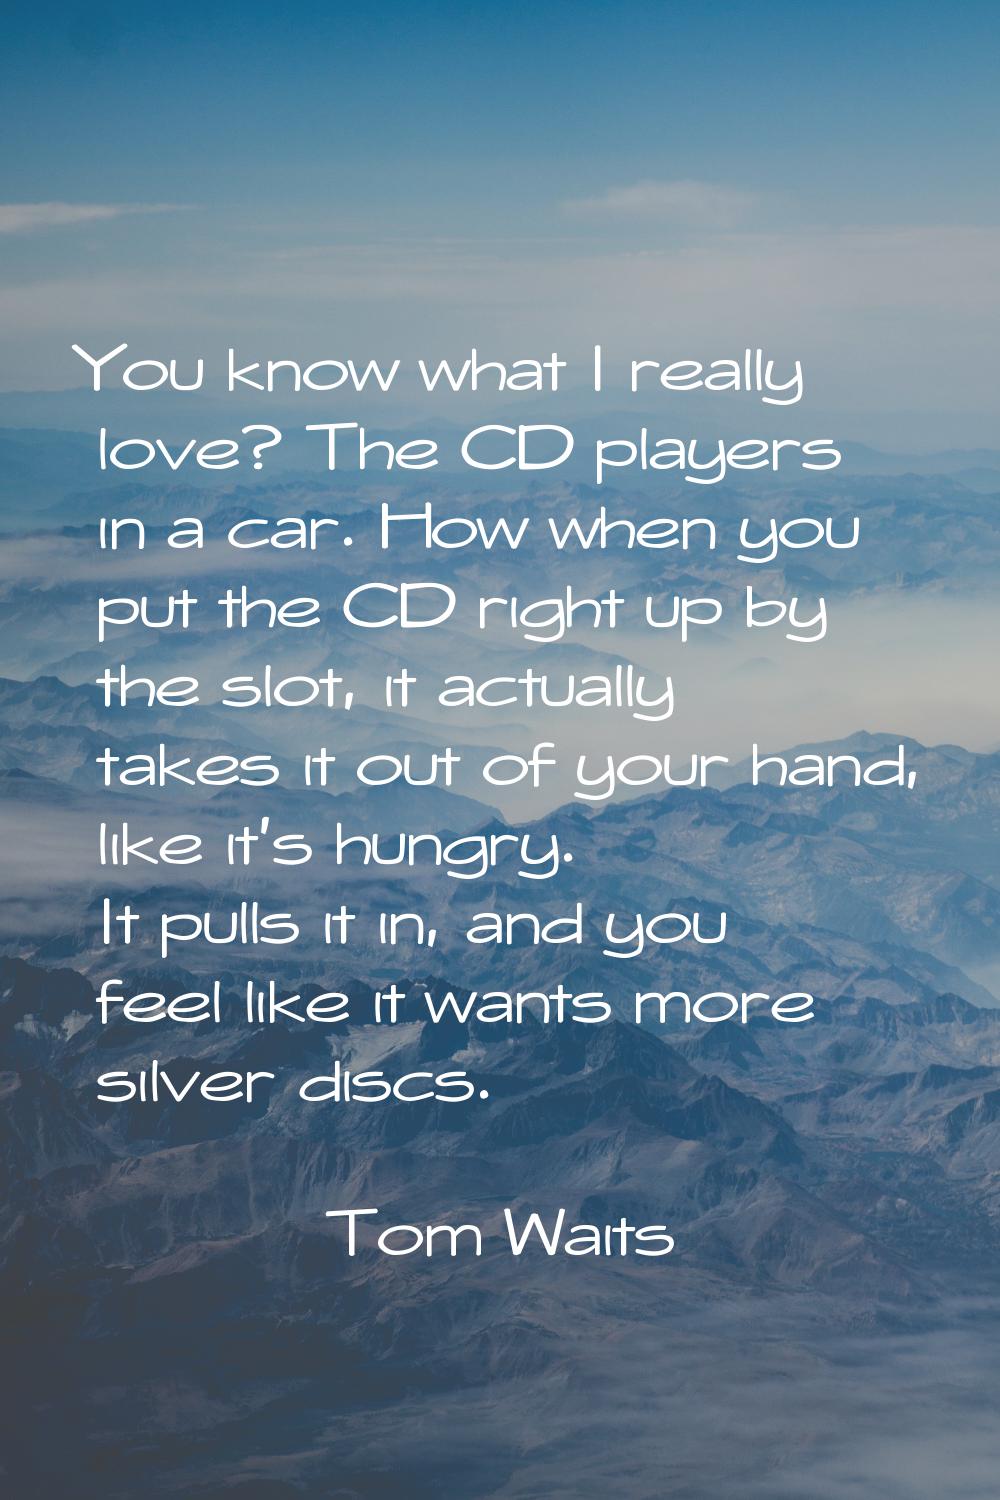 You know what I really love? The CD players in a car. How when you put the CD right up by the slot,